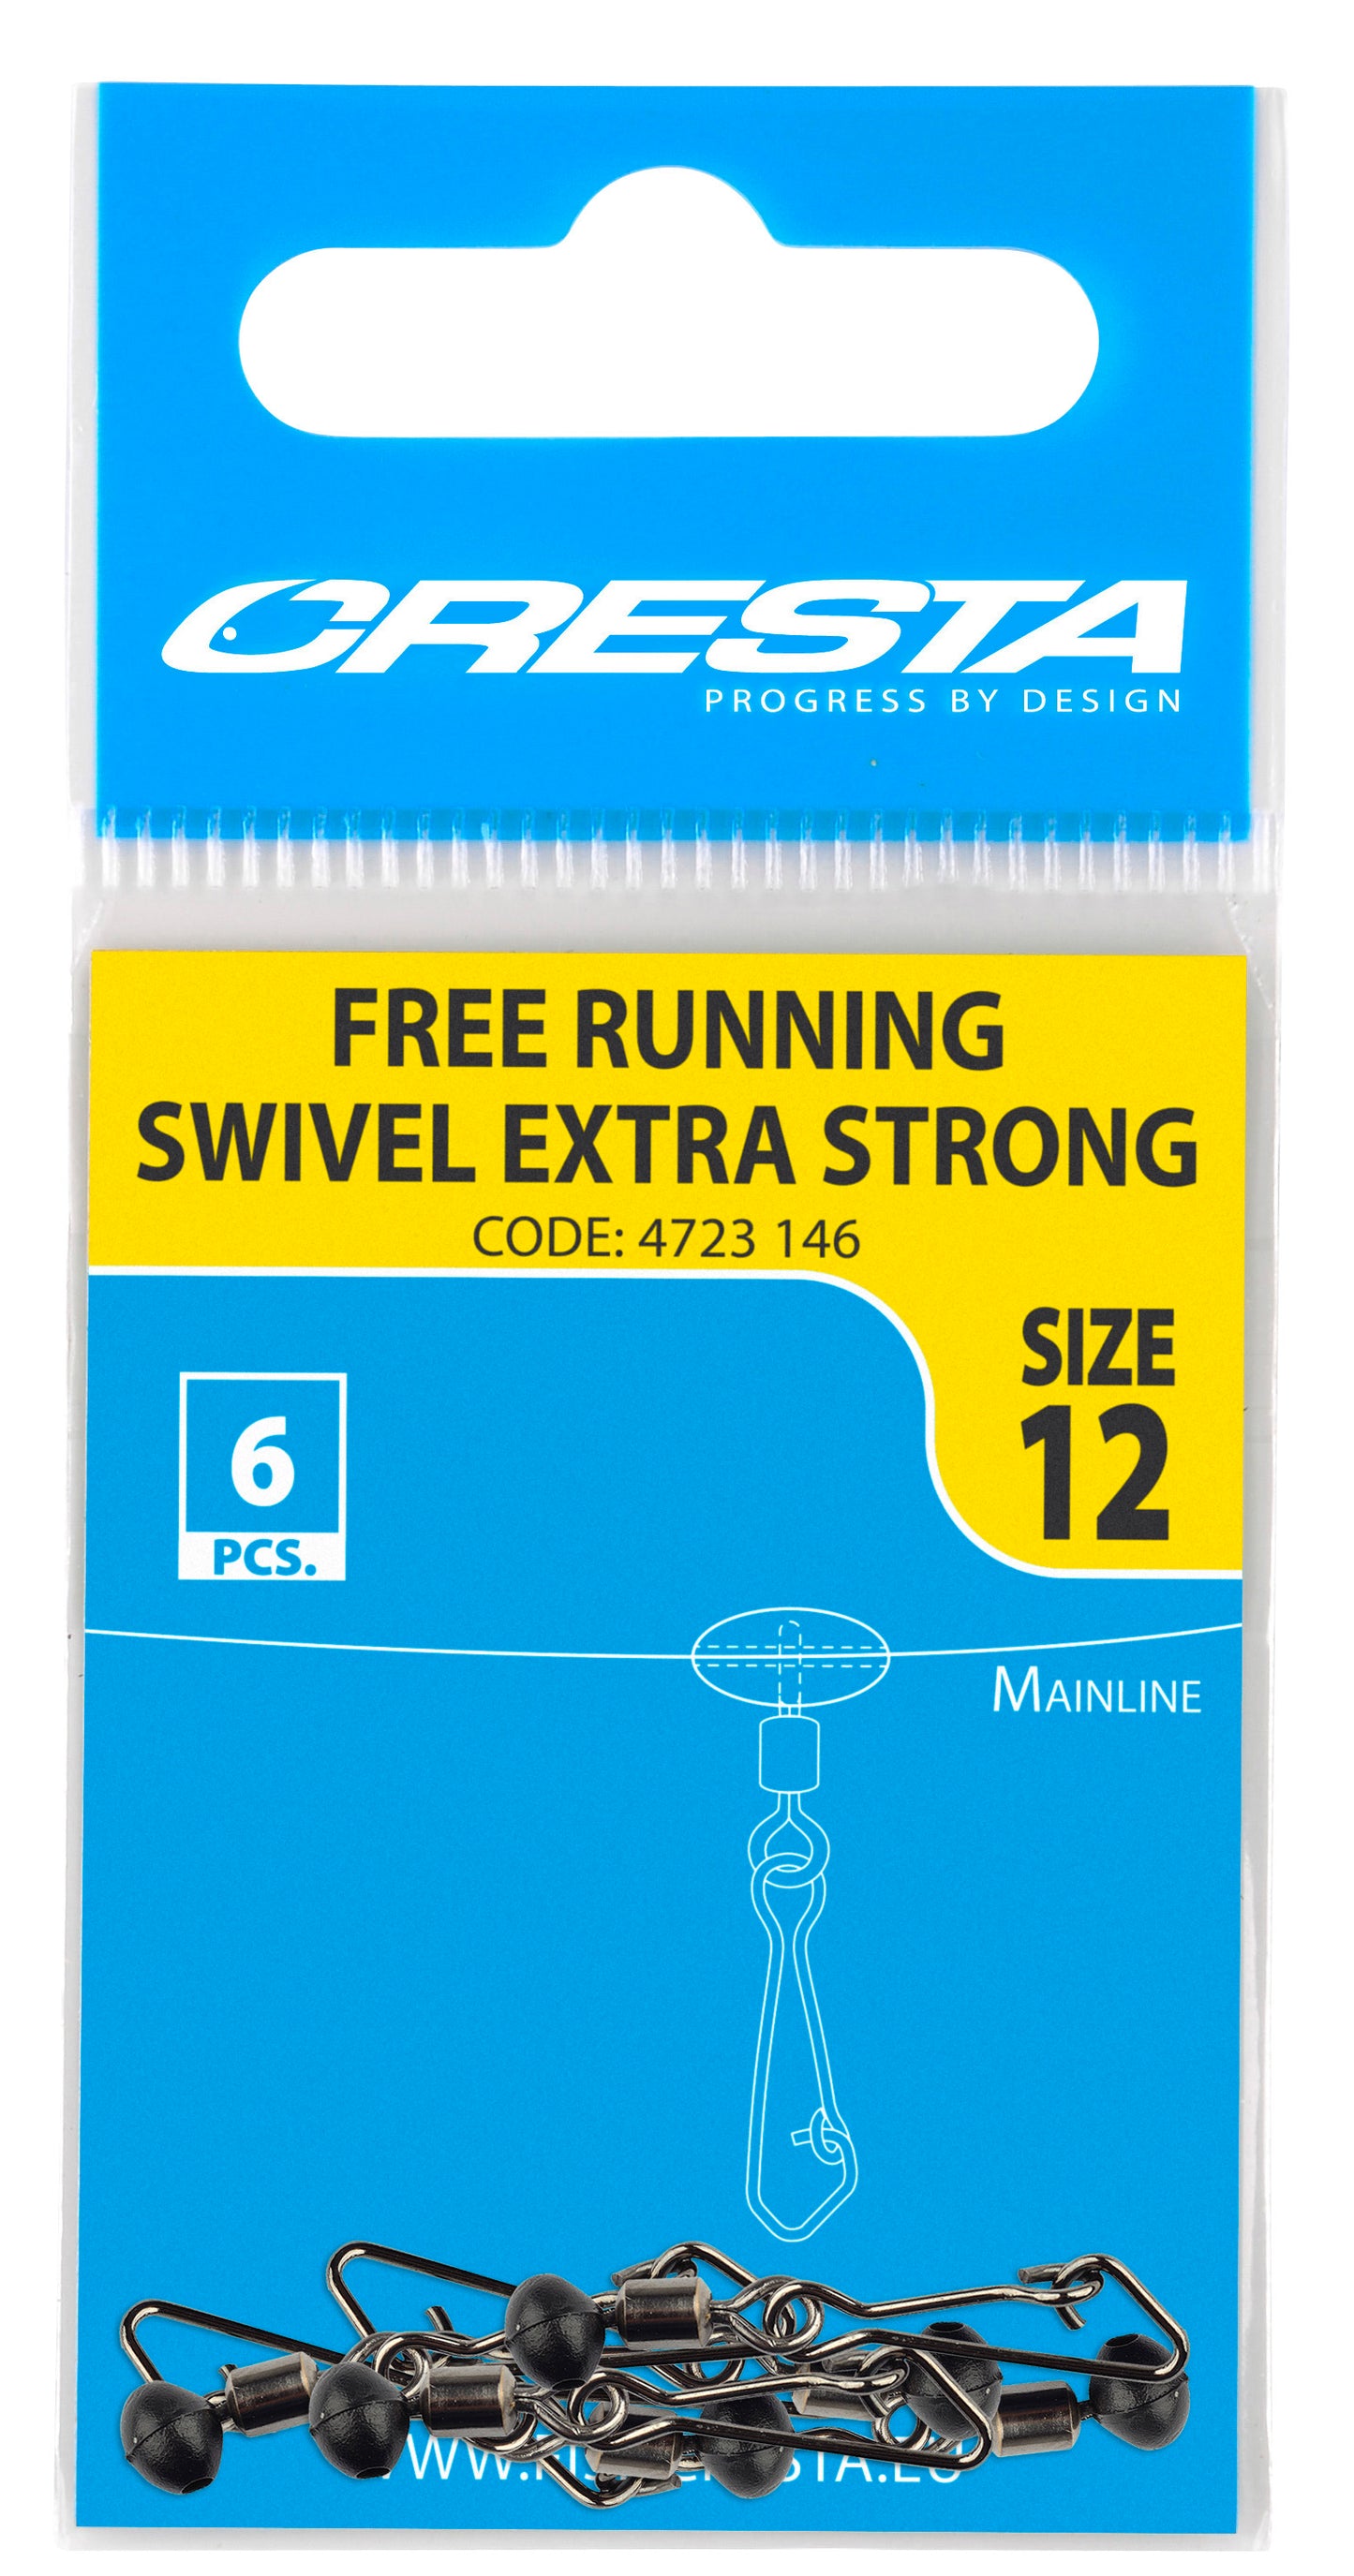 FREE RUNNING SWIVEL EXTRA STRONG